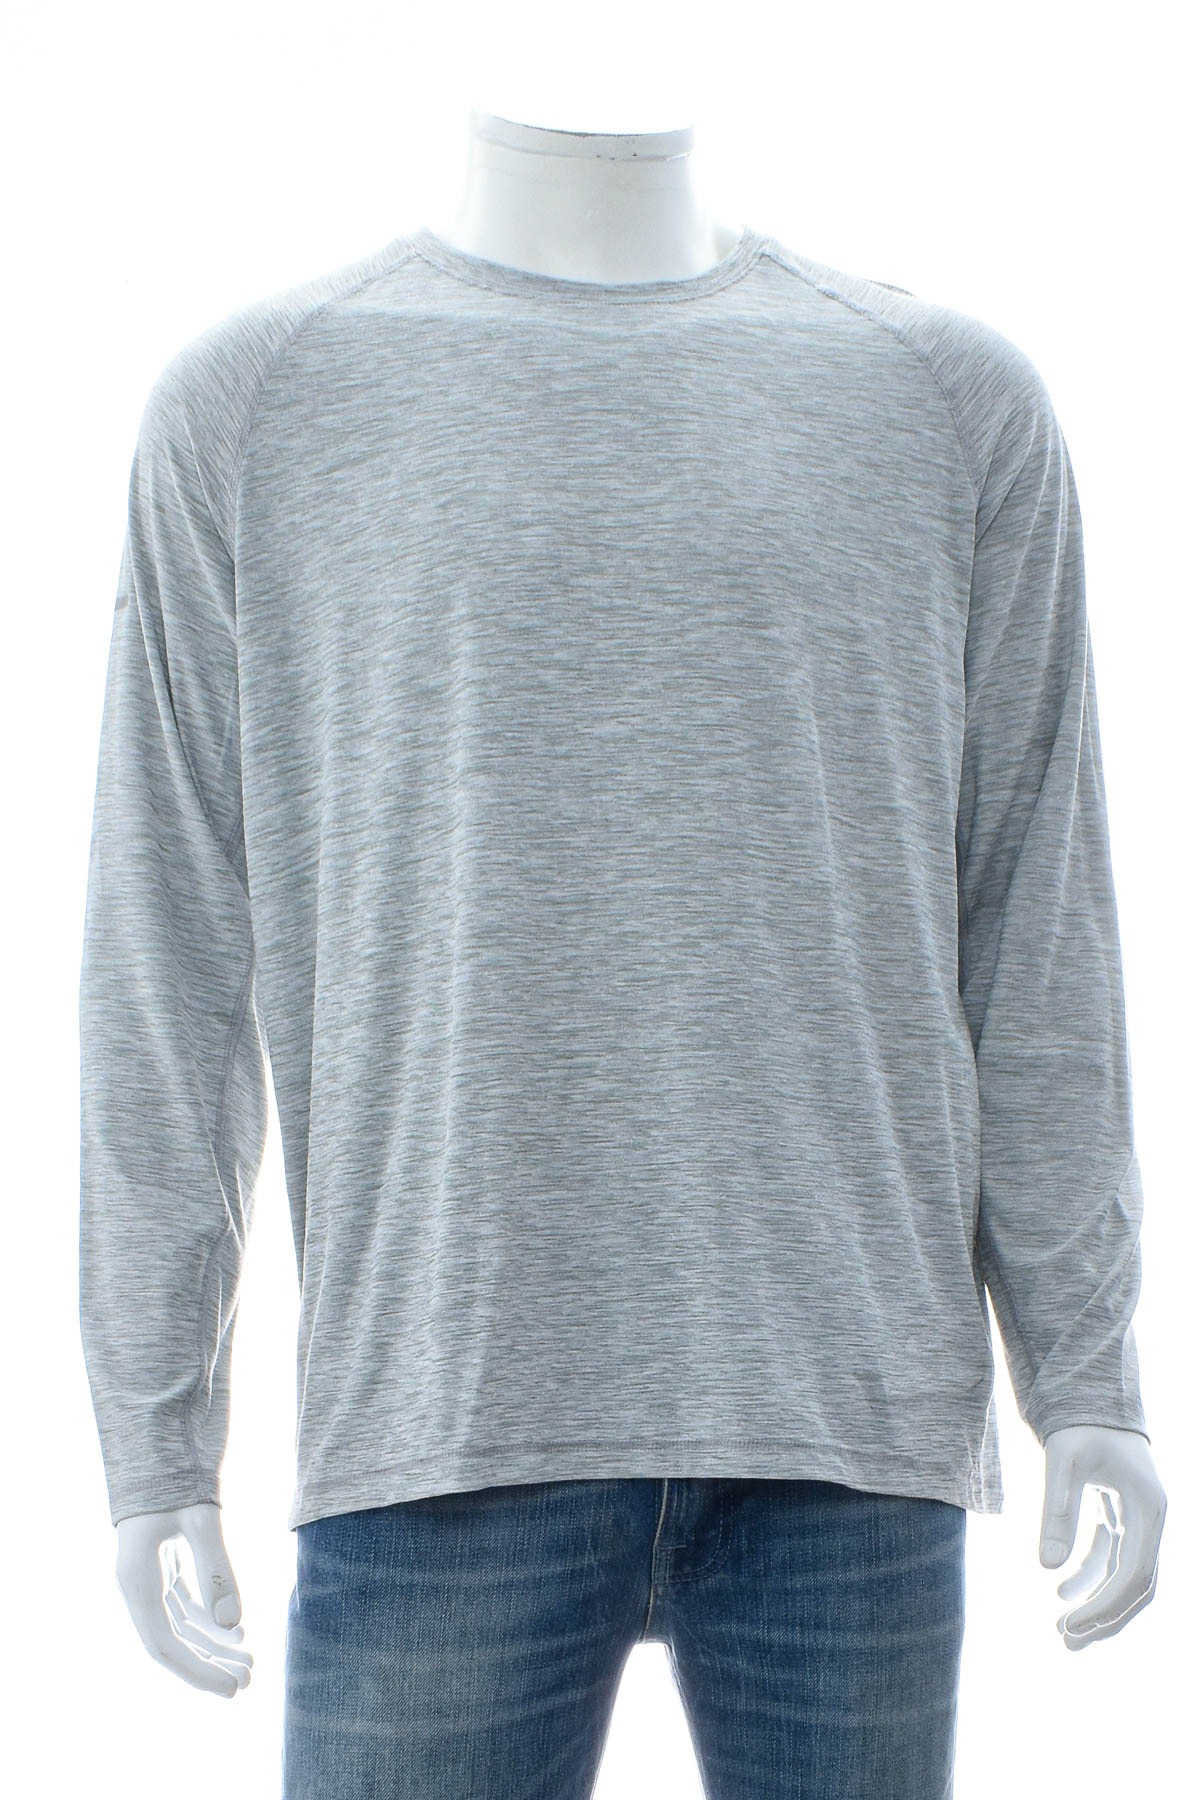 Men's blouse - OLD NAVY ACTIVE - 0